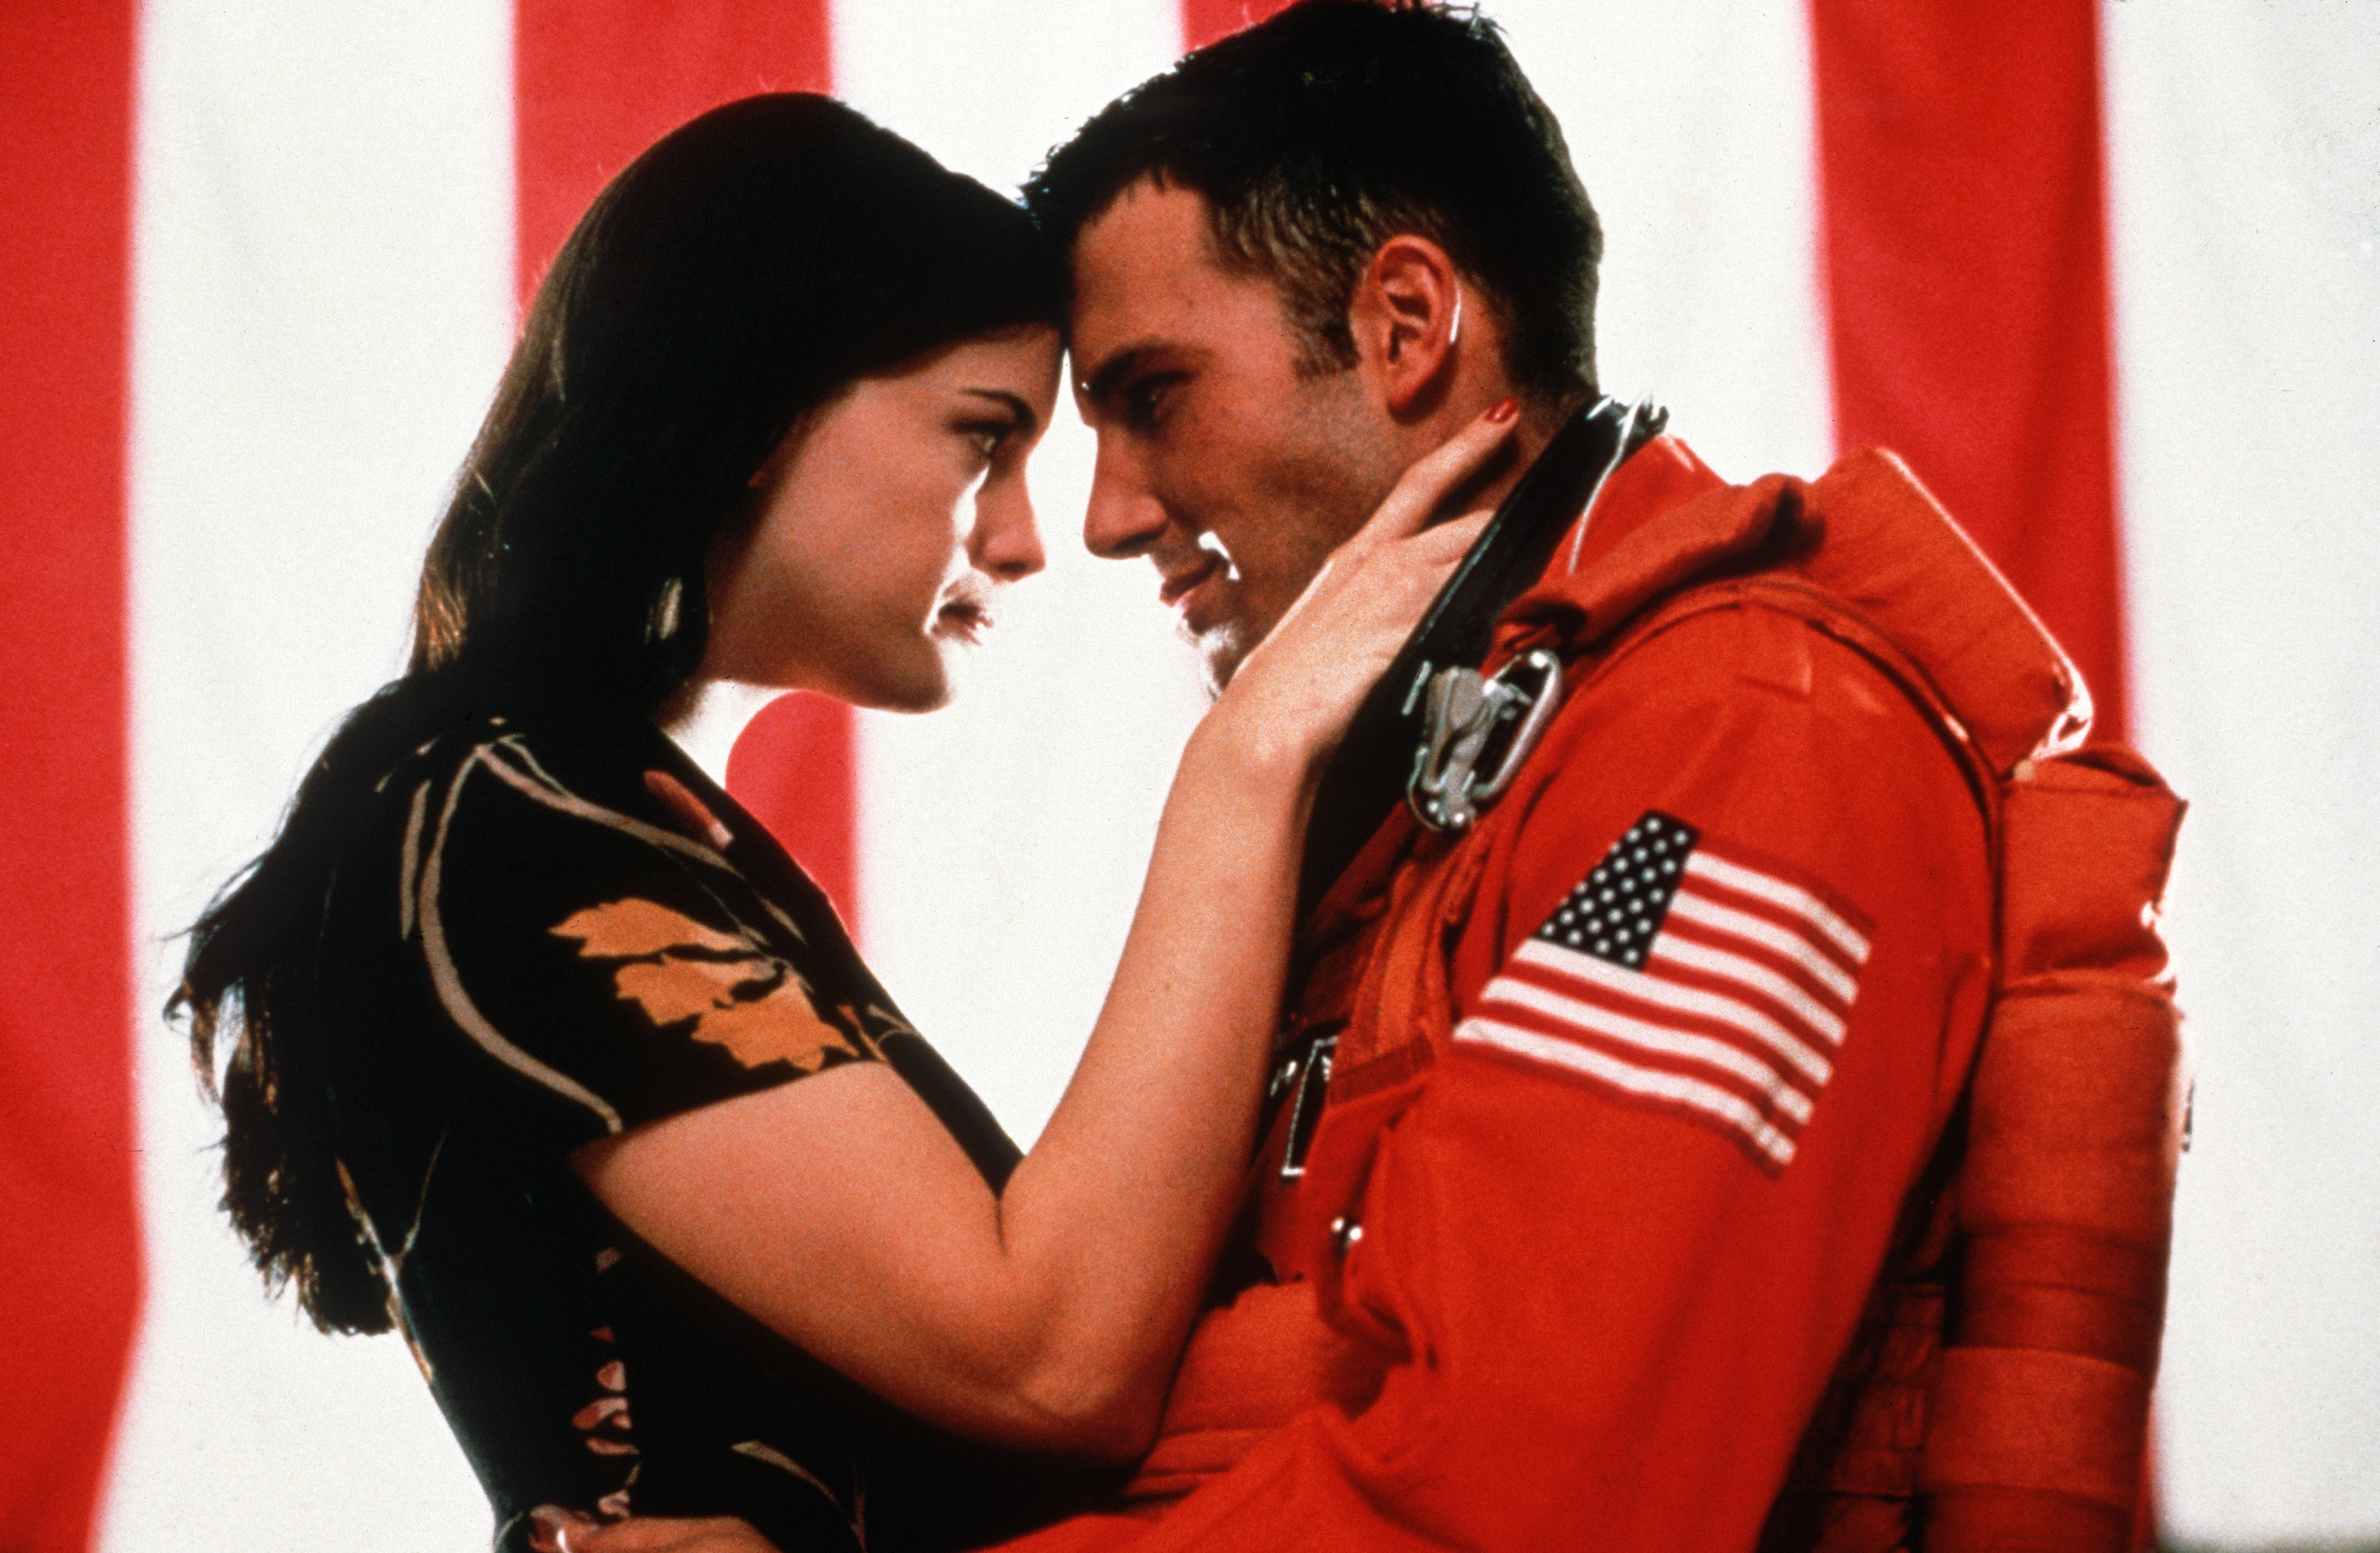 <p><em>Armageddon</em> ends with A.J. and Grace getting married, and their love story is a big part of the movie. That wasn’t the case in the original screenplay, though. A love story was written into the film after the success of <em>Titanic</em>, hoping to glean some of that audience.</p>